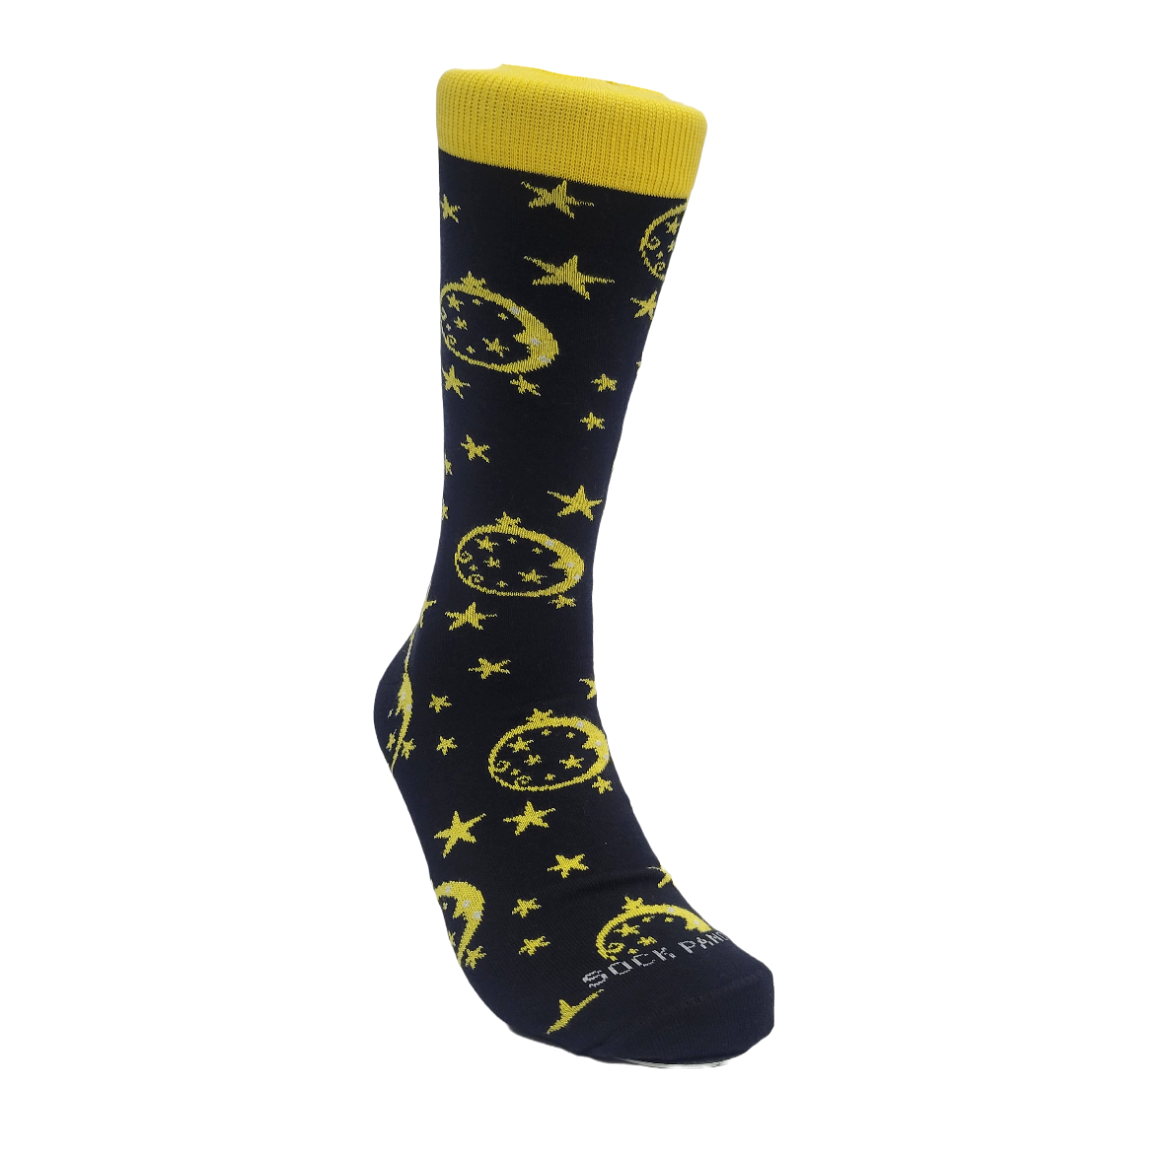 Night Sky Patterned Socks from the Sock Panda (Adult Large)